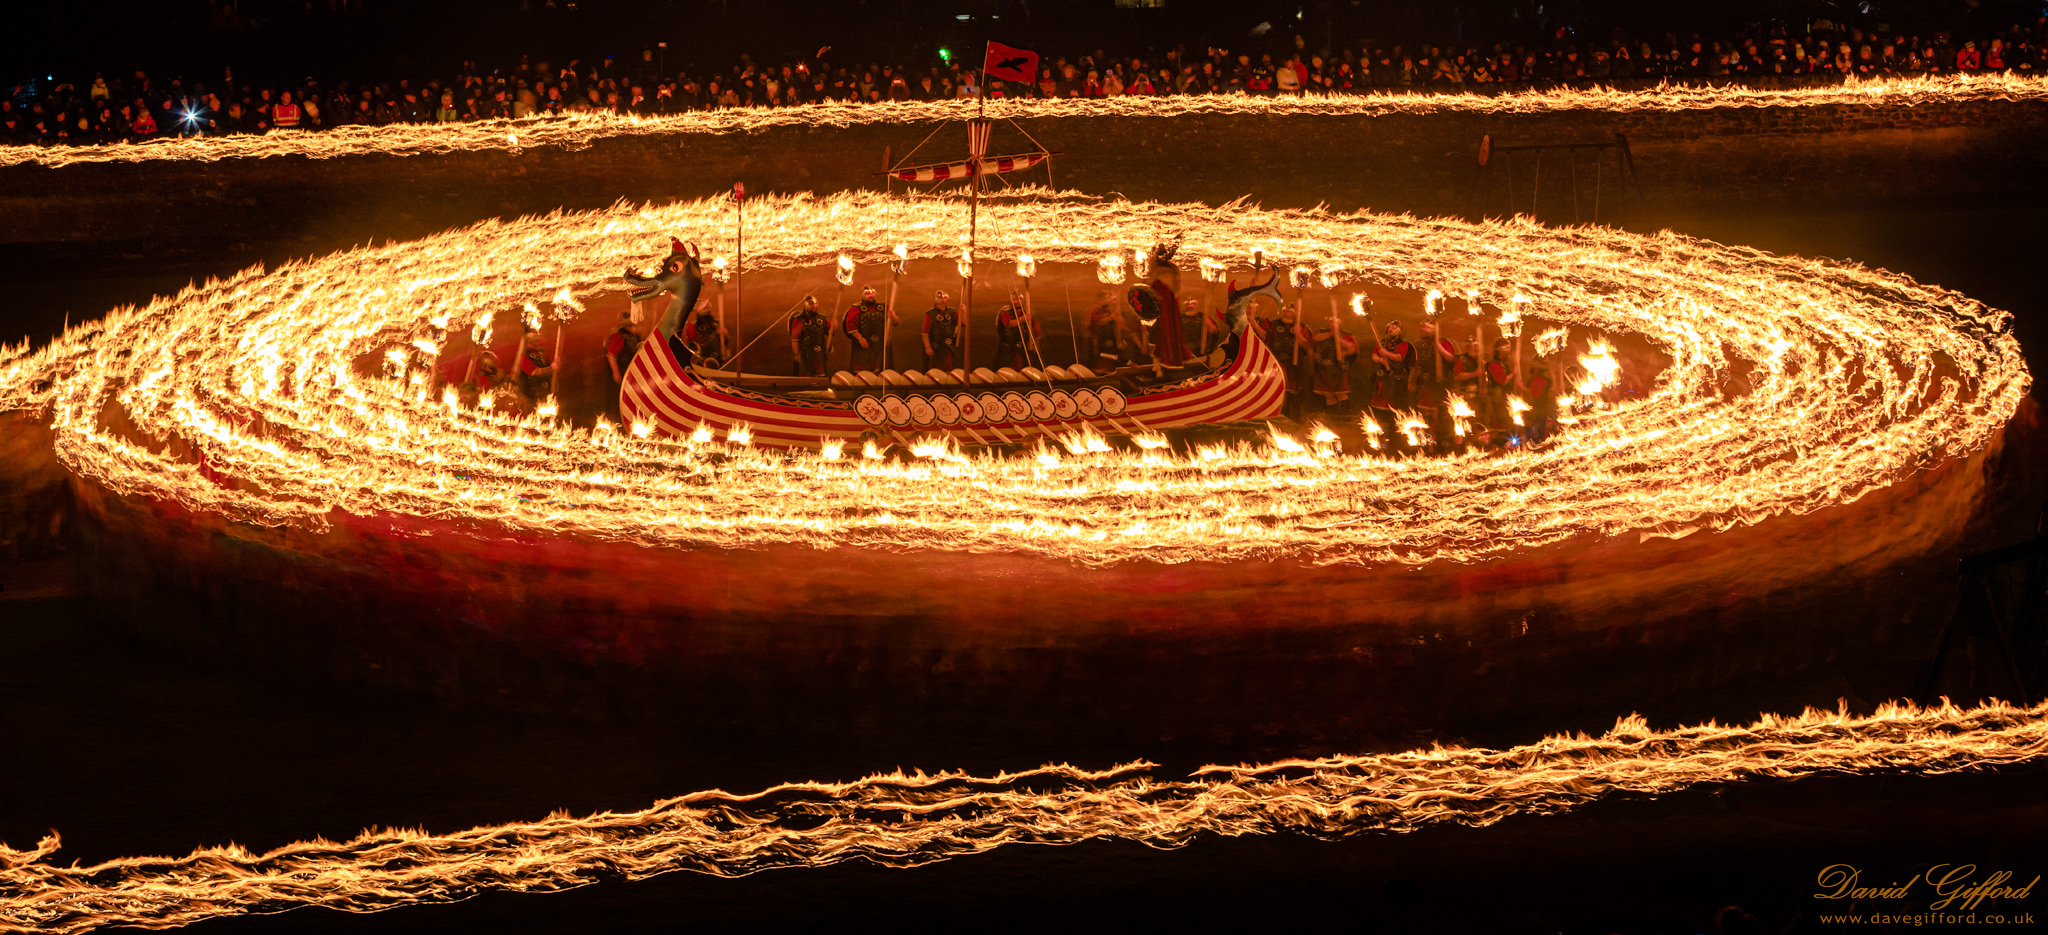 Photo: Up Helly Aa 2020: Burning Ring of Fire